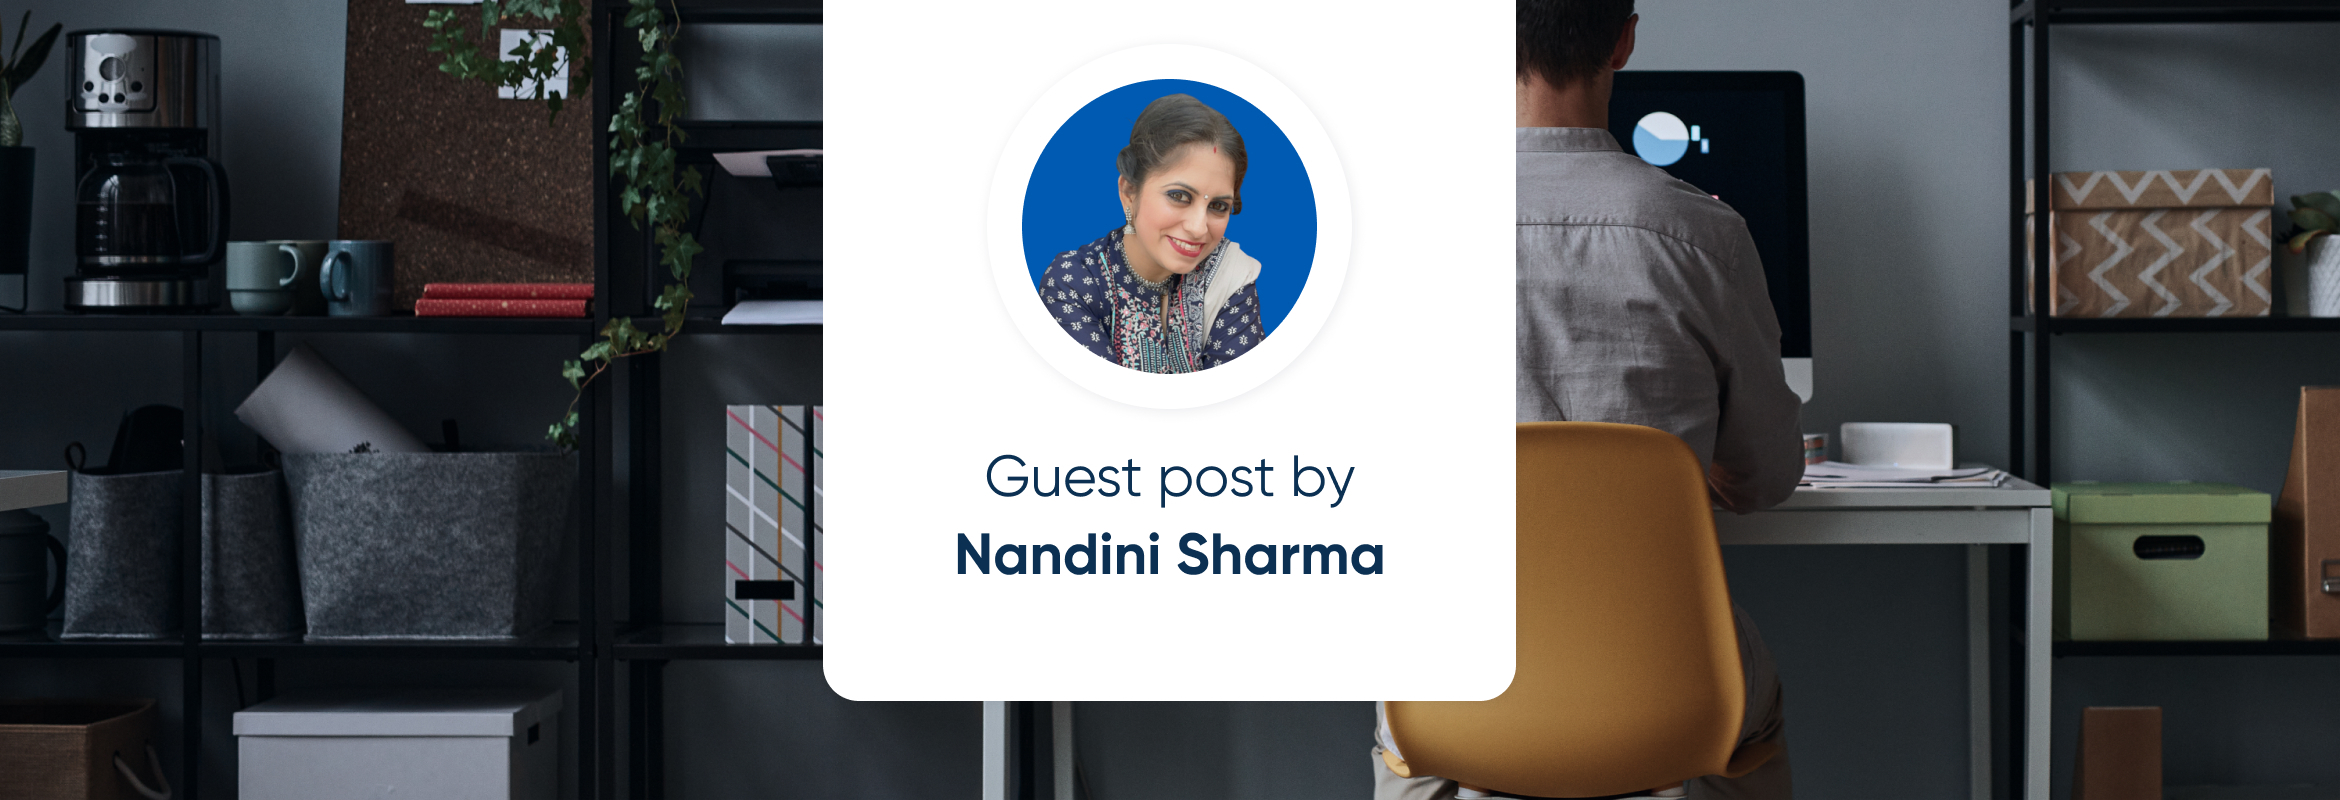 collaboration with Freelancers by Nandini Sharma